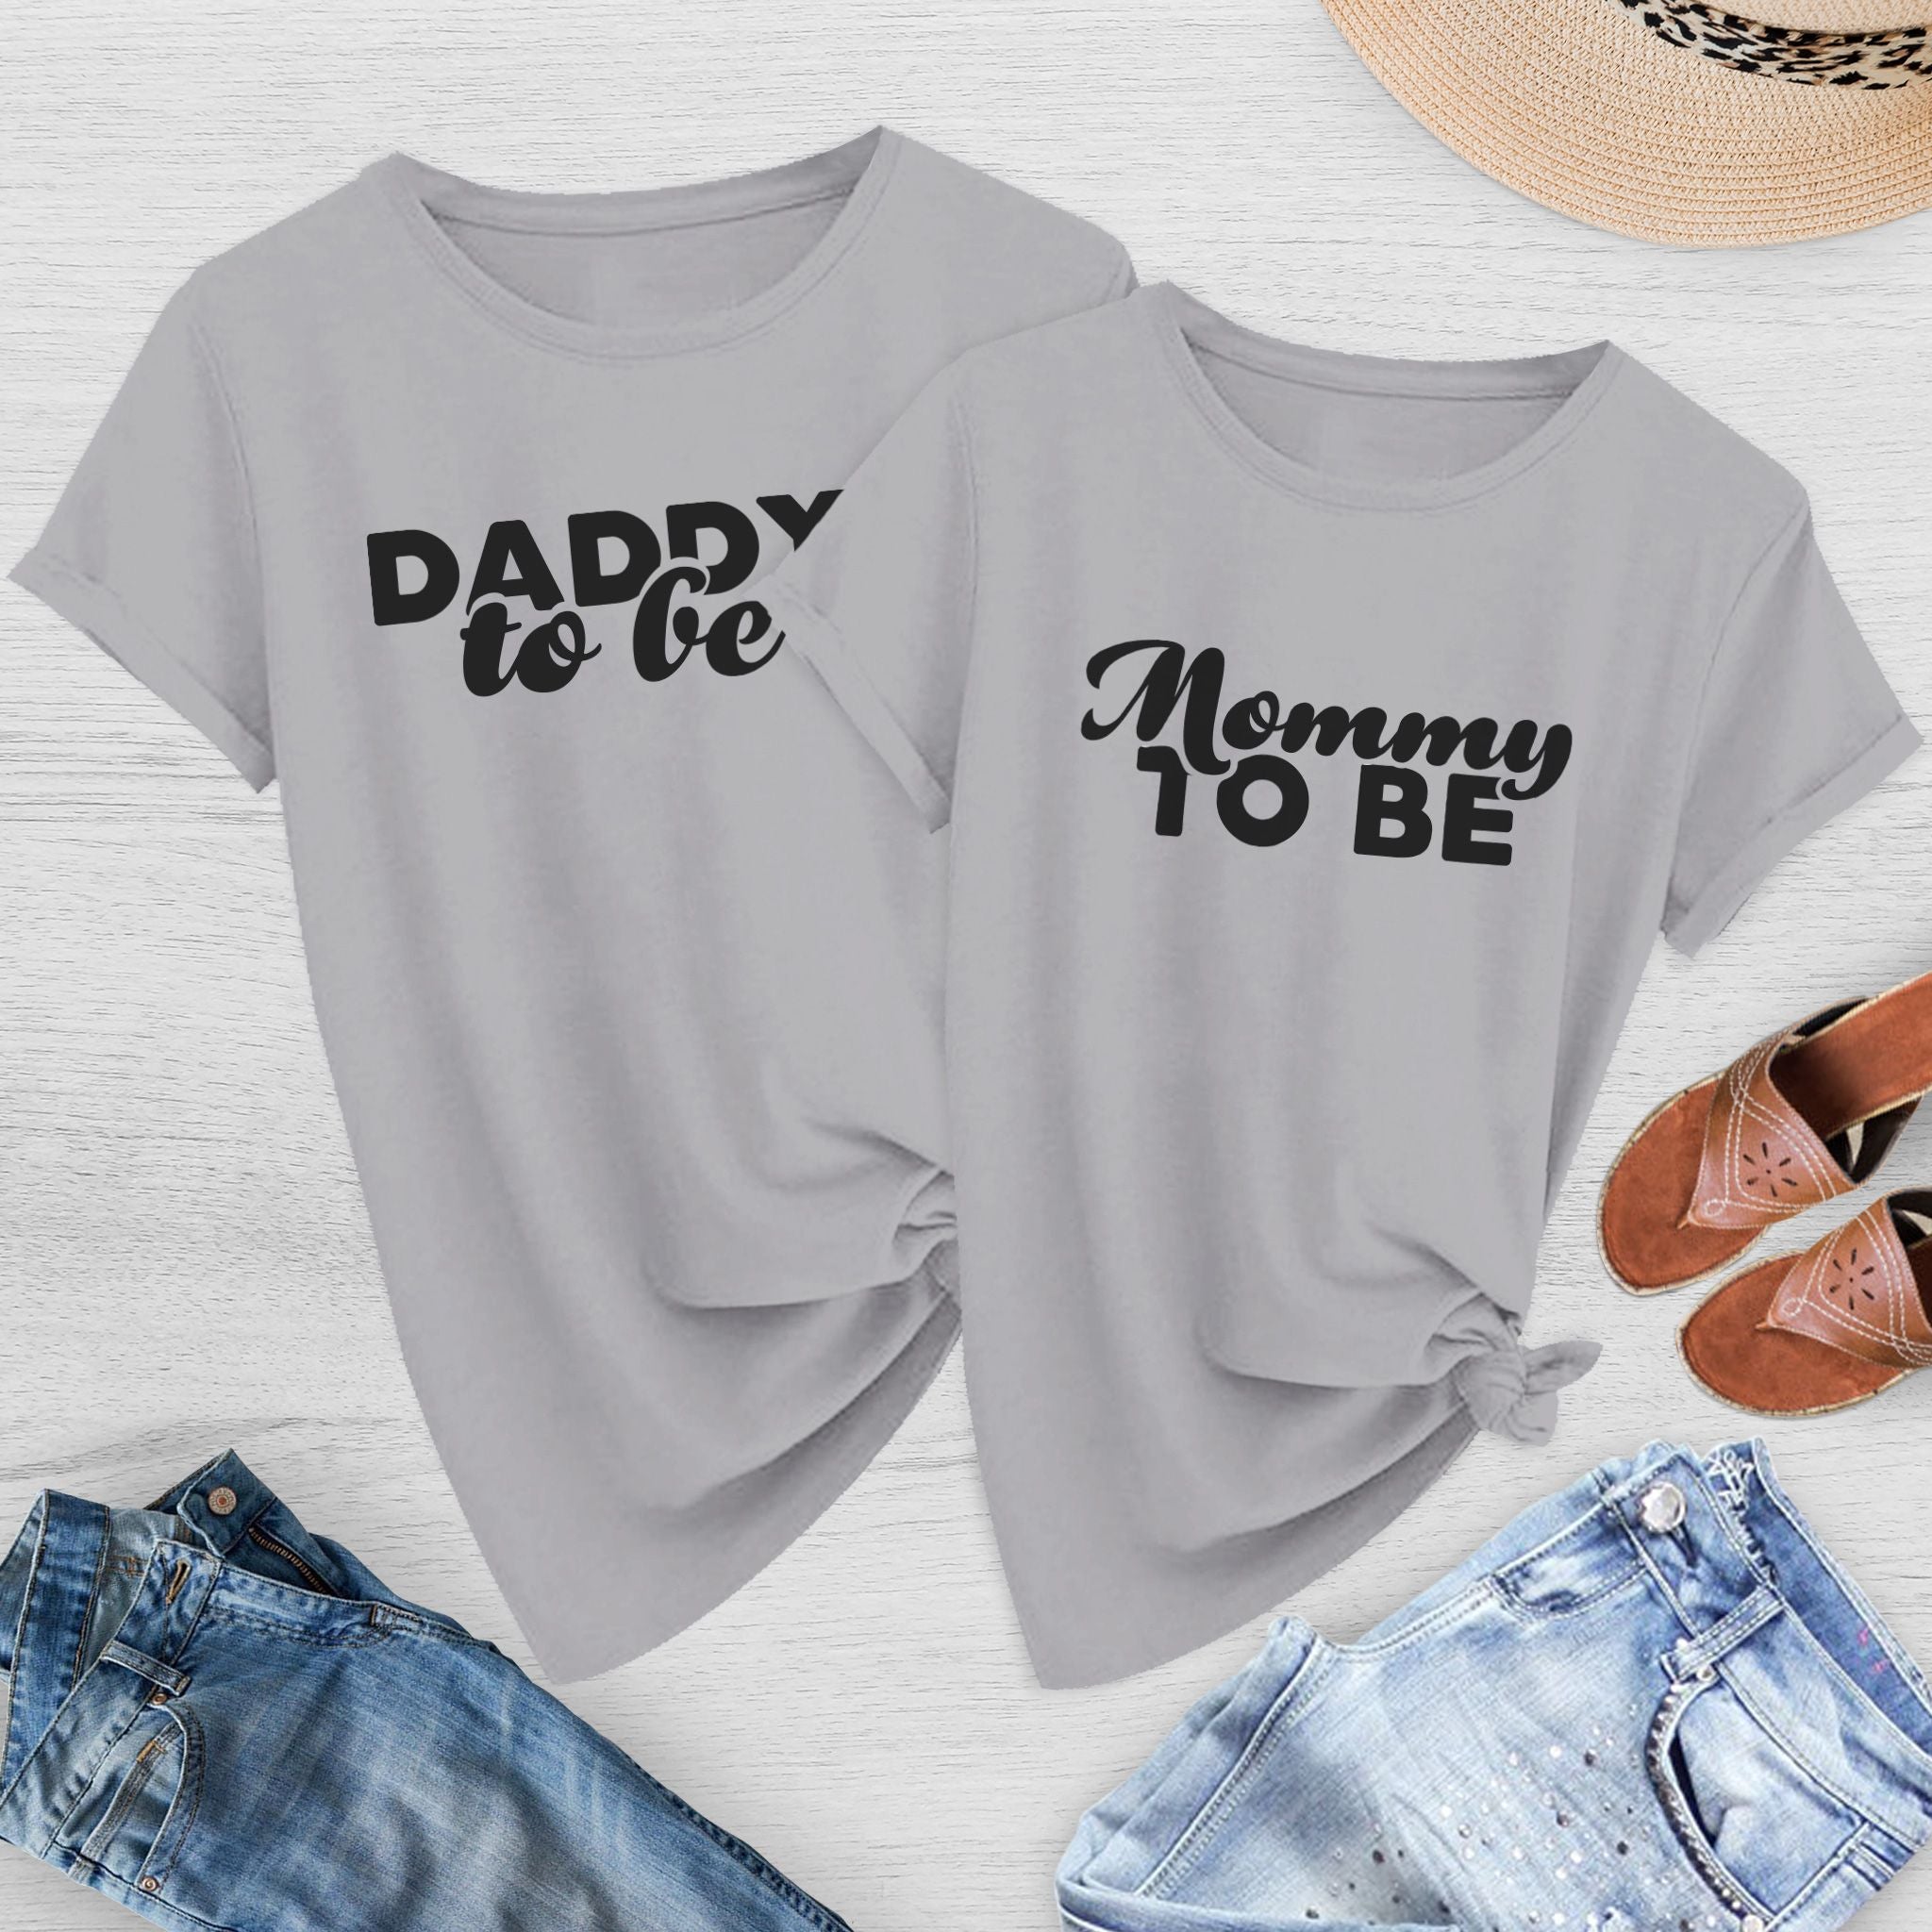 New Parents - Daddy to be & Mommy to be